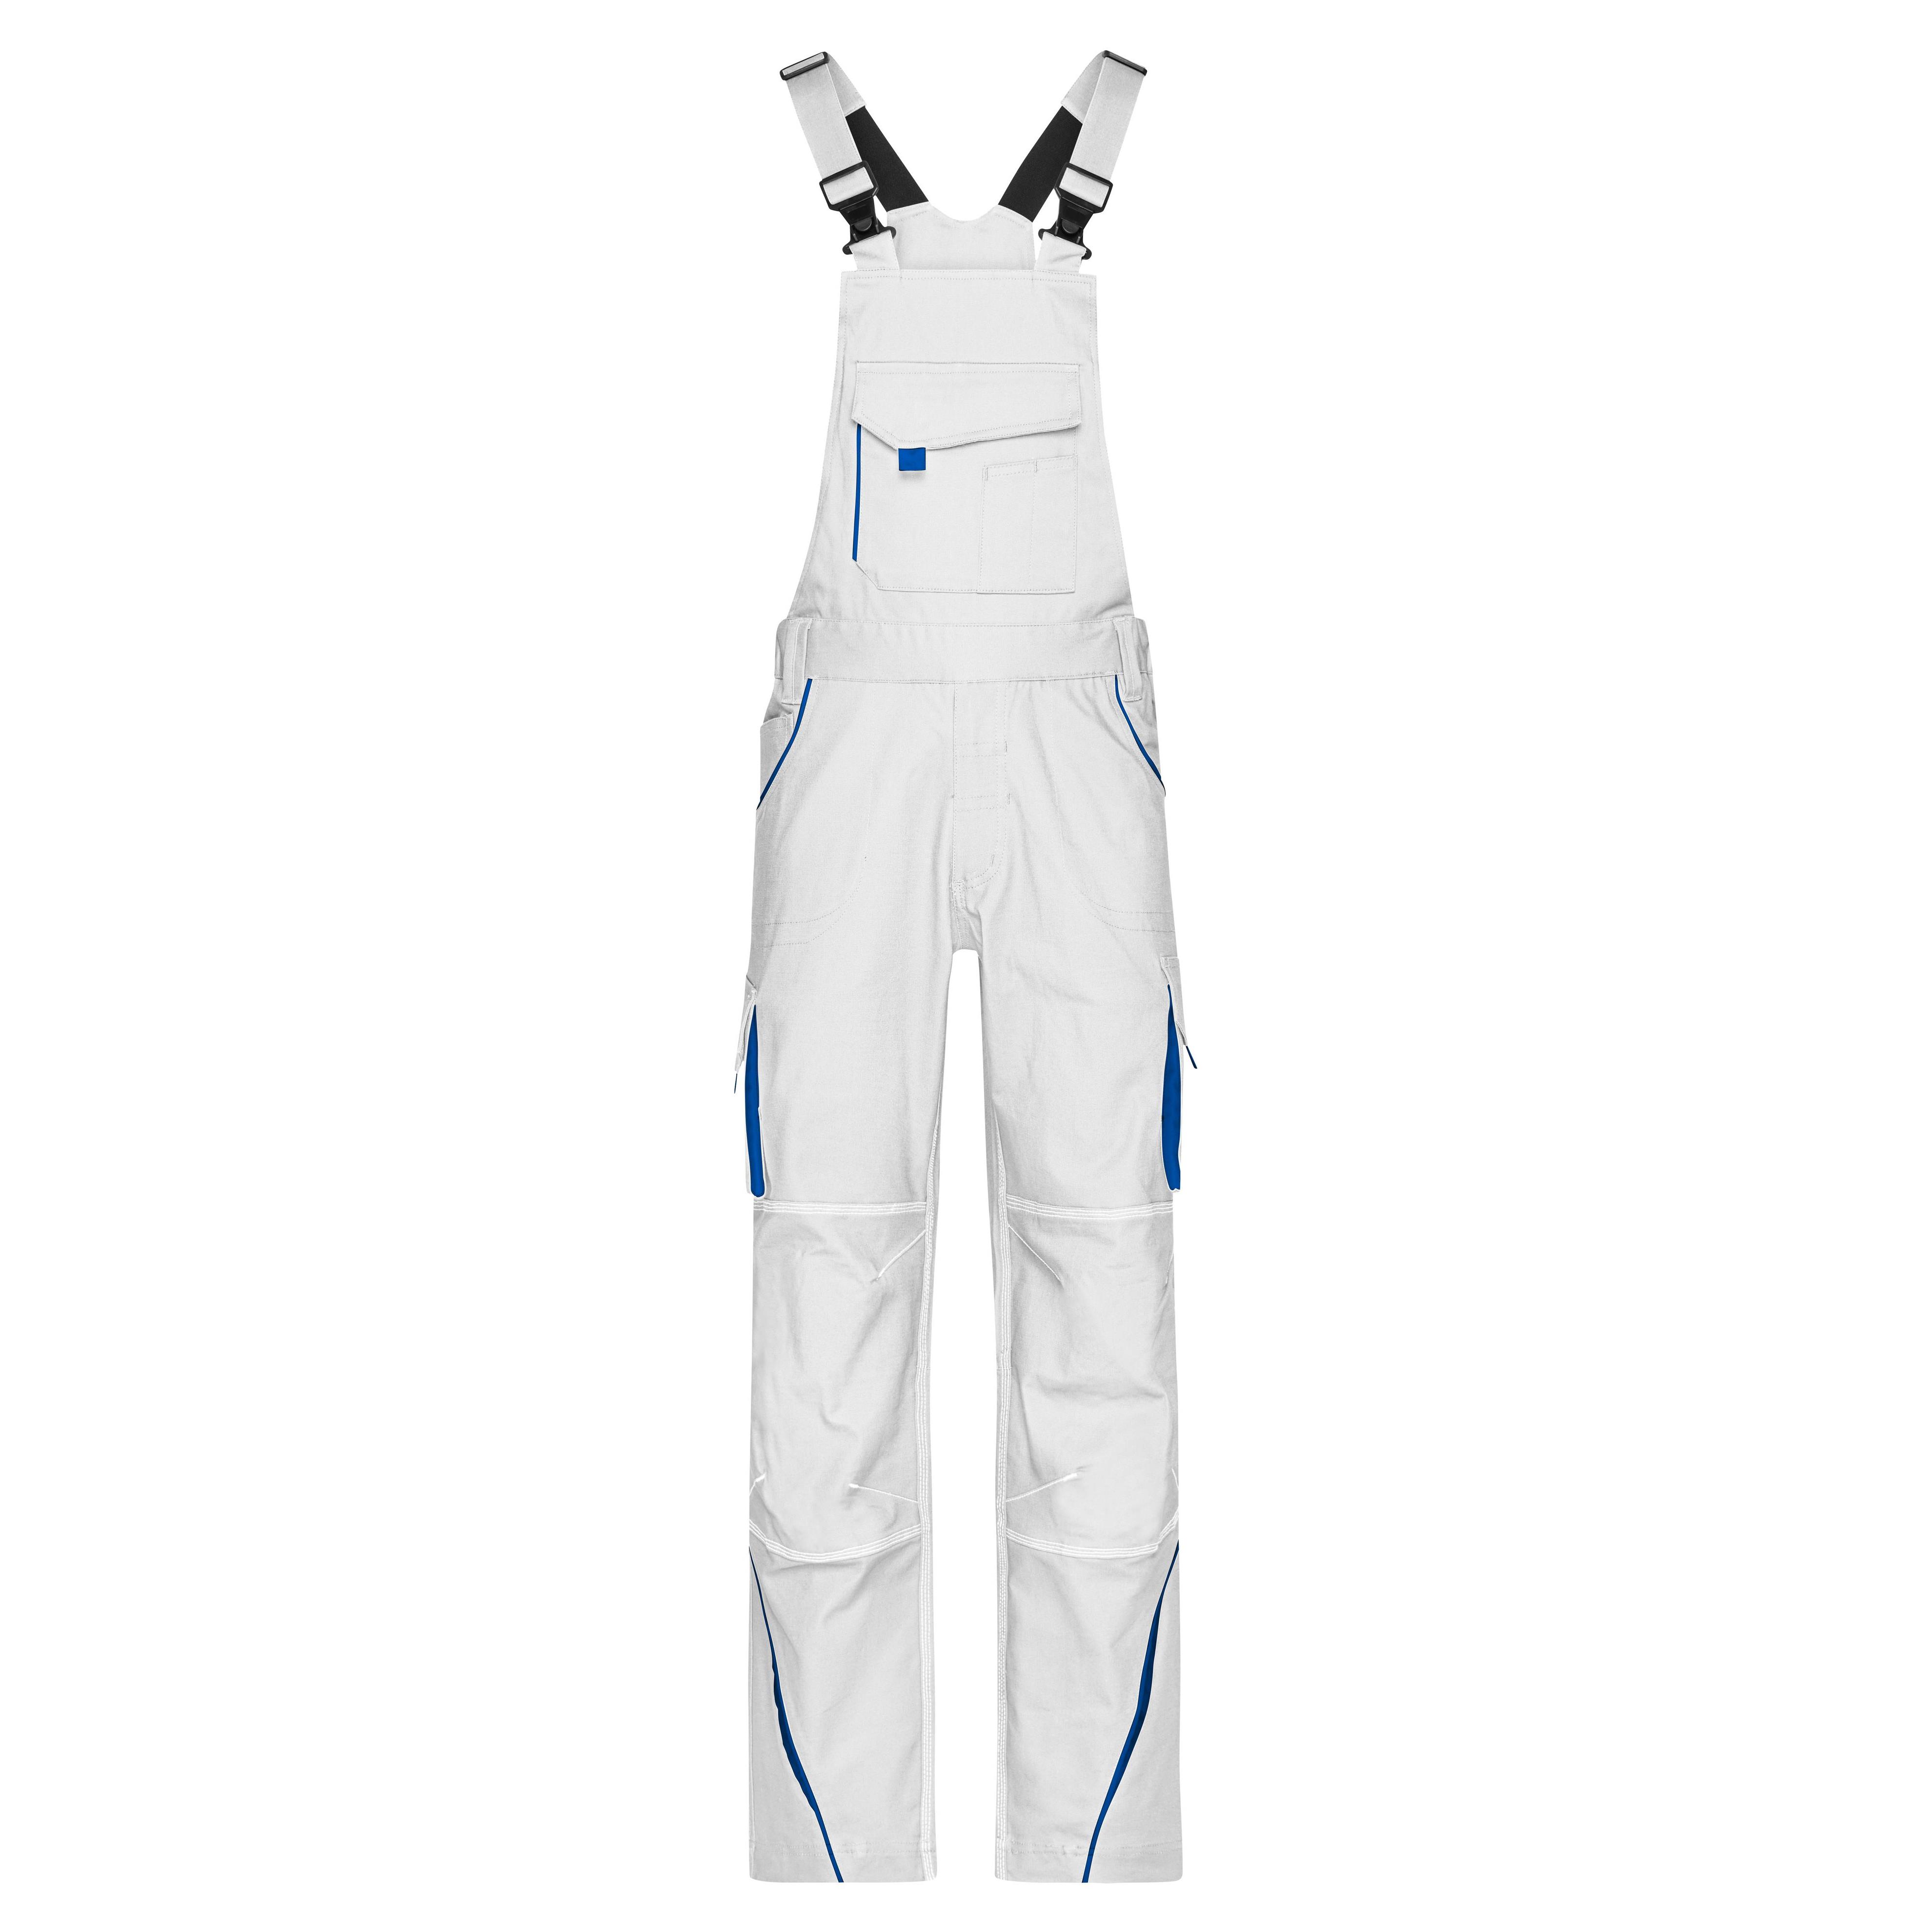 Workwear Pants with Bib - COLOR -